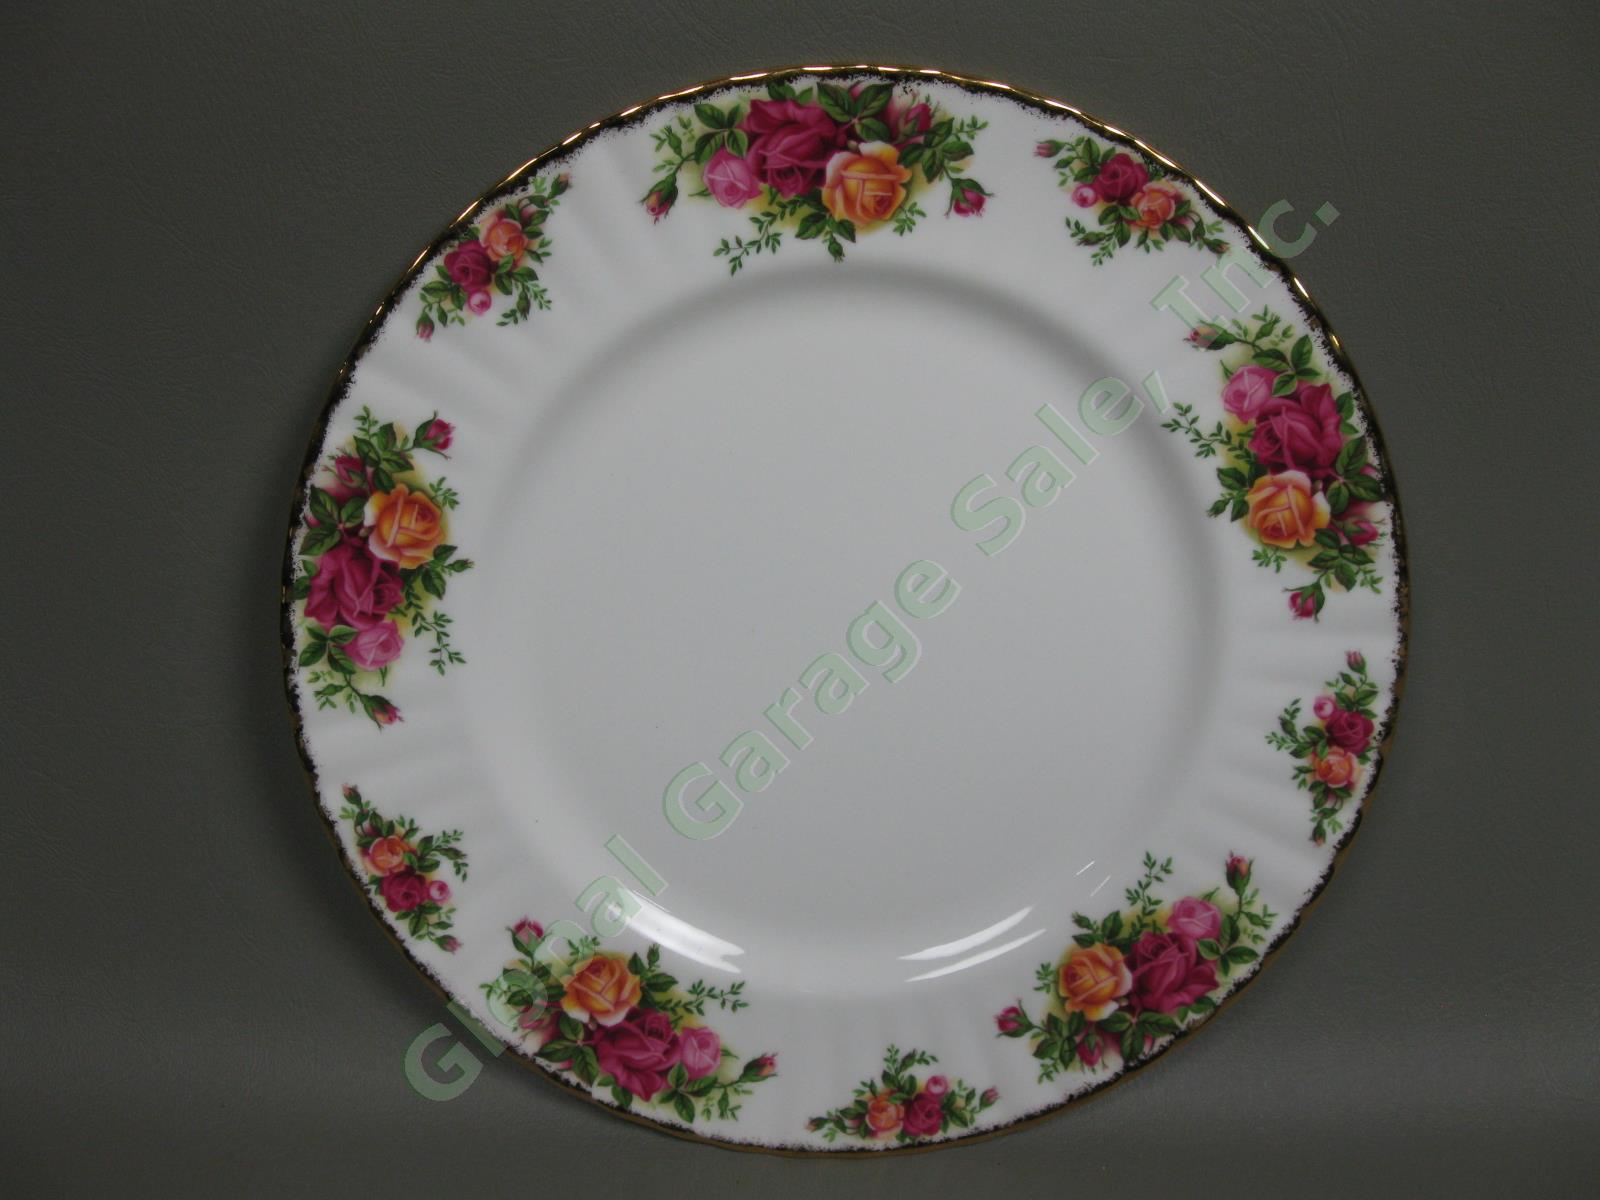 8 Royal Albert Old Country Roses Dinner Plate Fluted Gold Trim Bone China Set NR 1